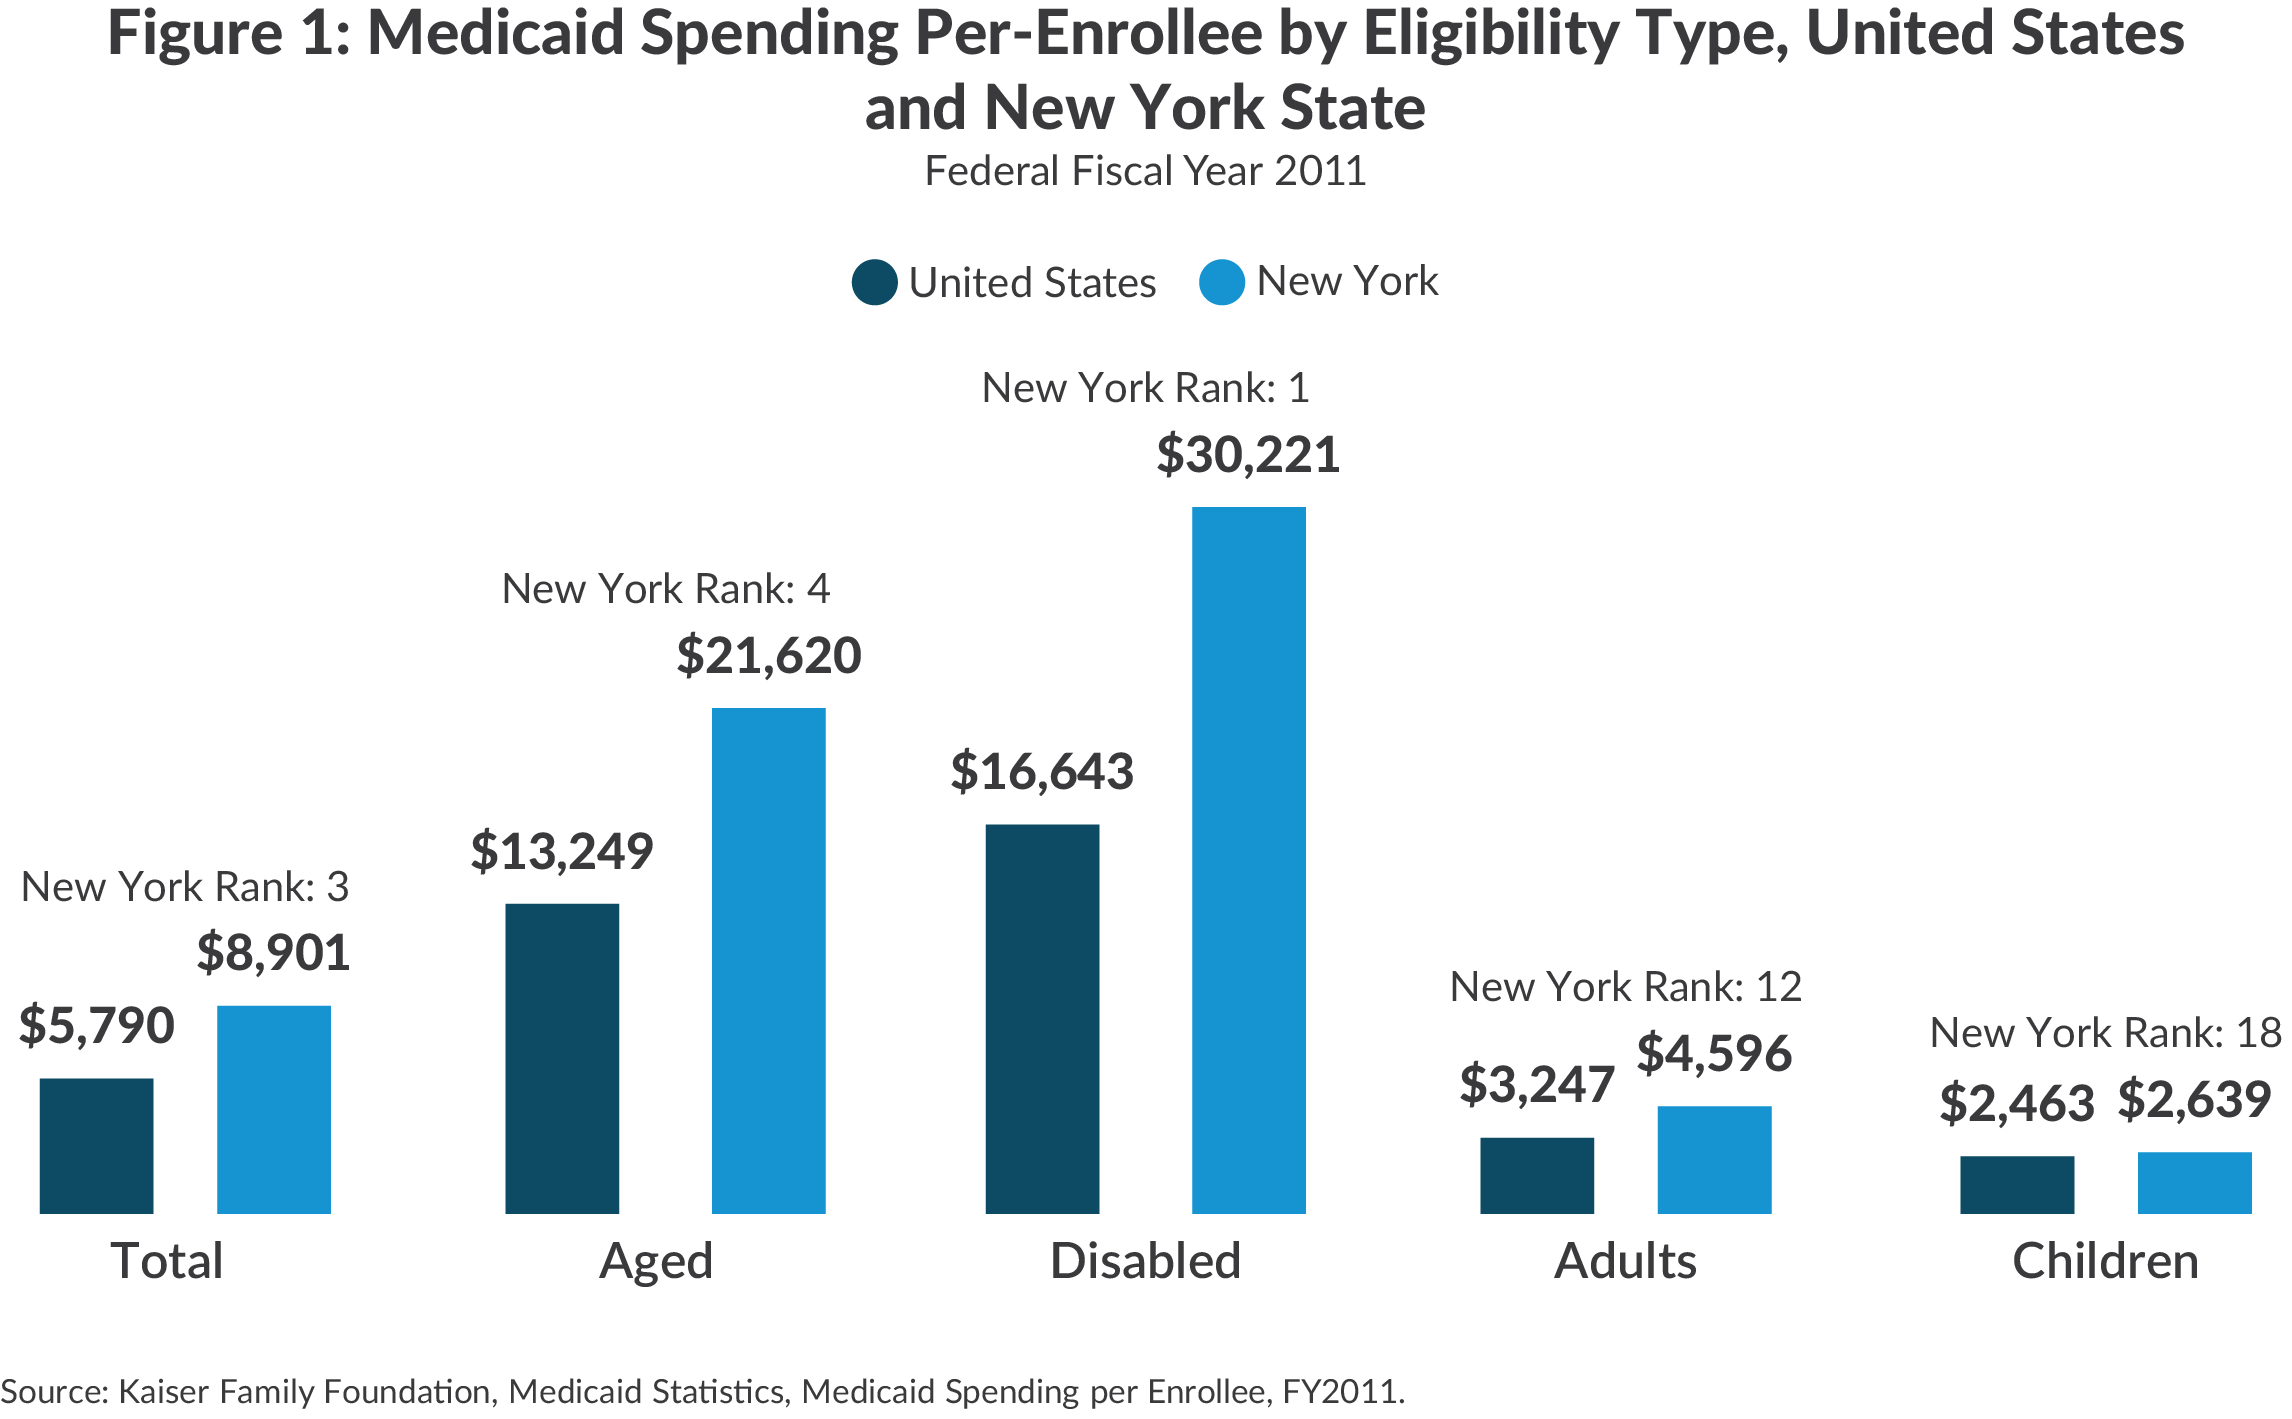 NY Medicaid spending per enrollee by eligibility type vs US